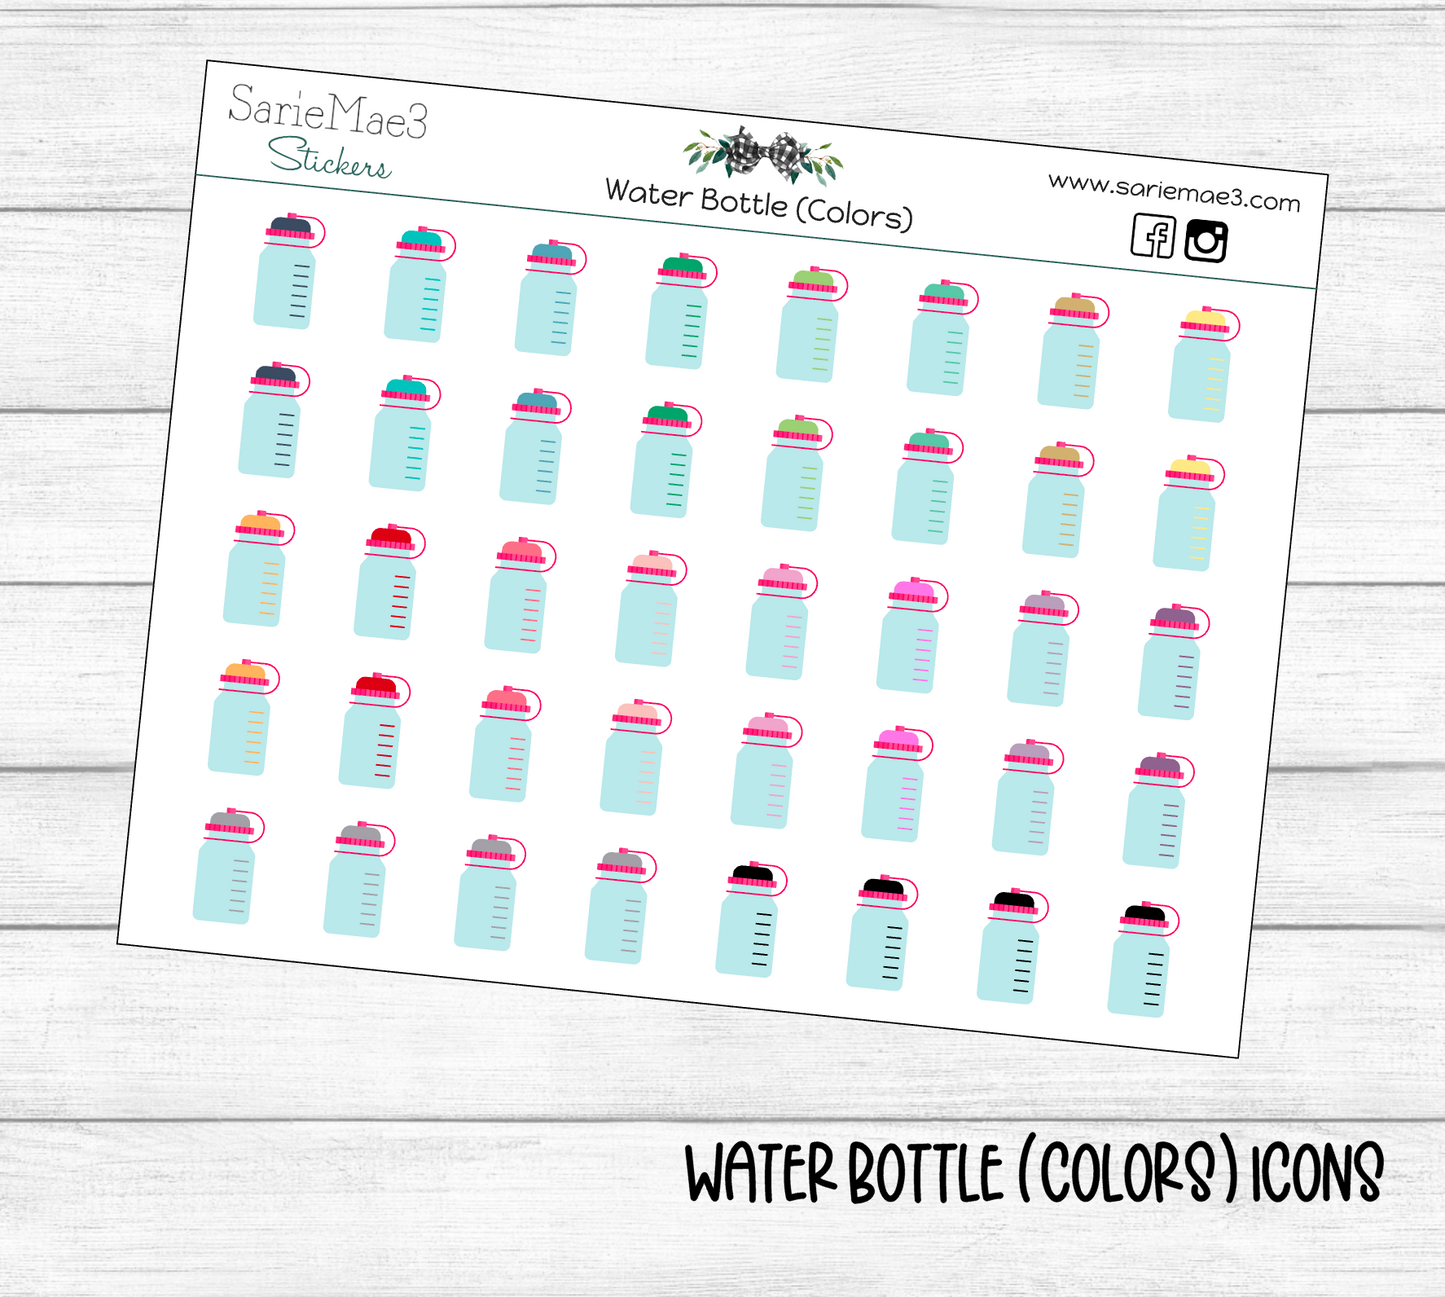 Water Bottle (Colors) Icons